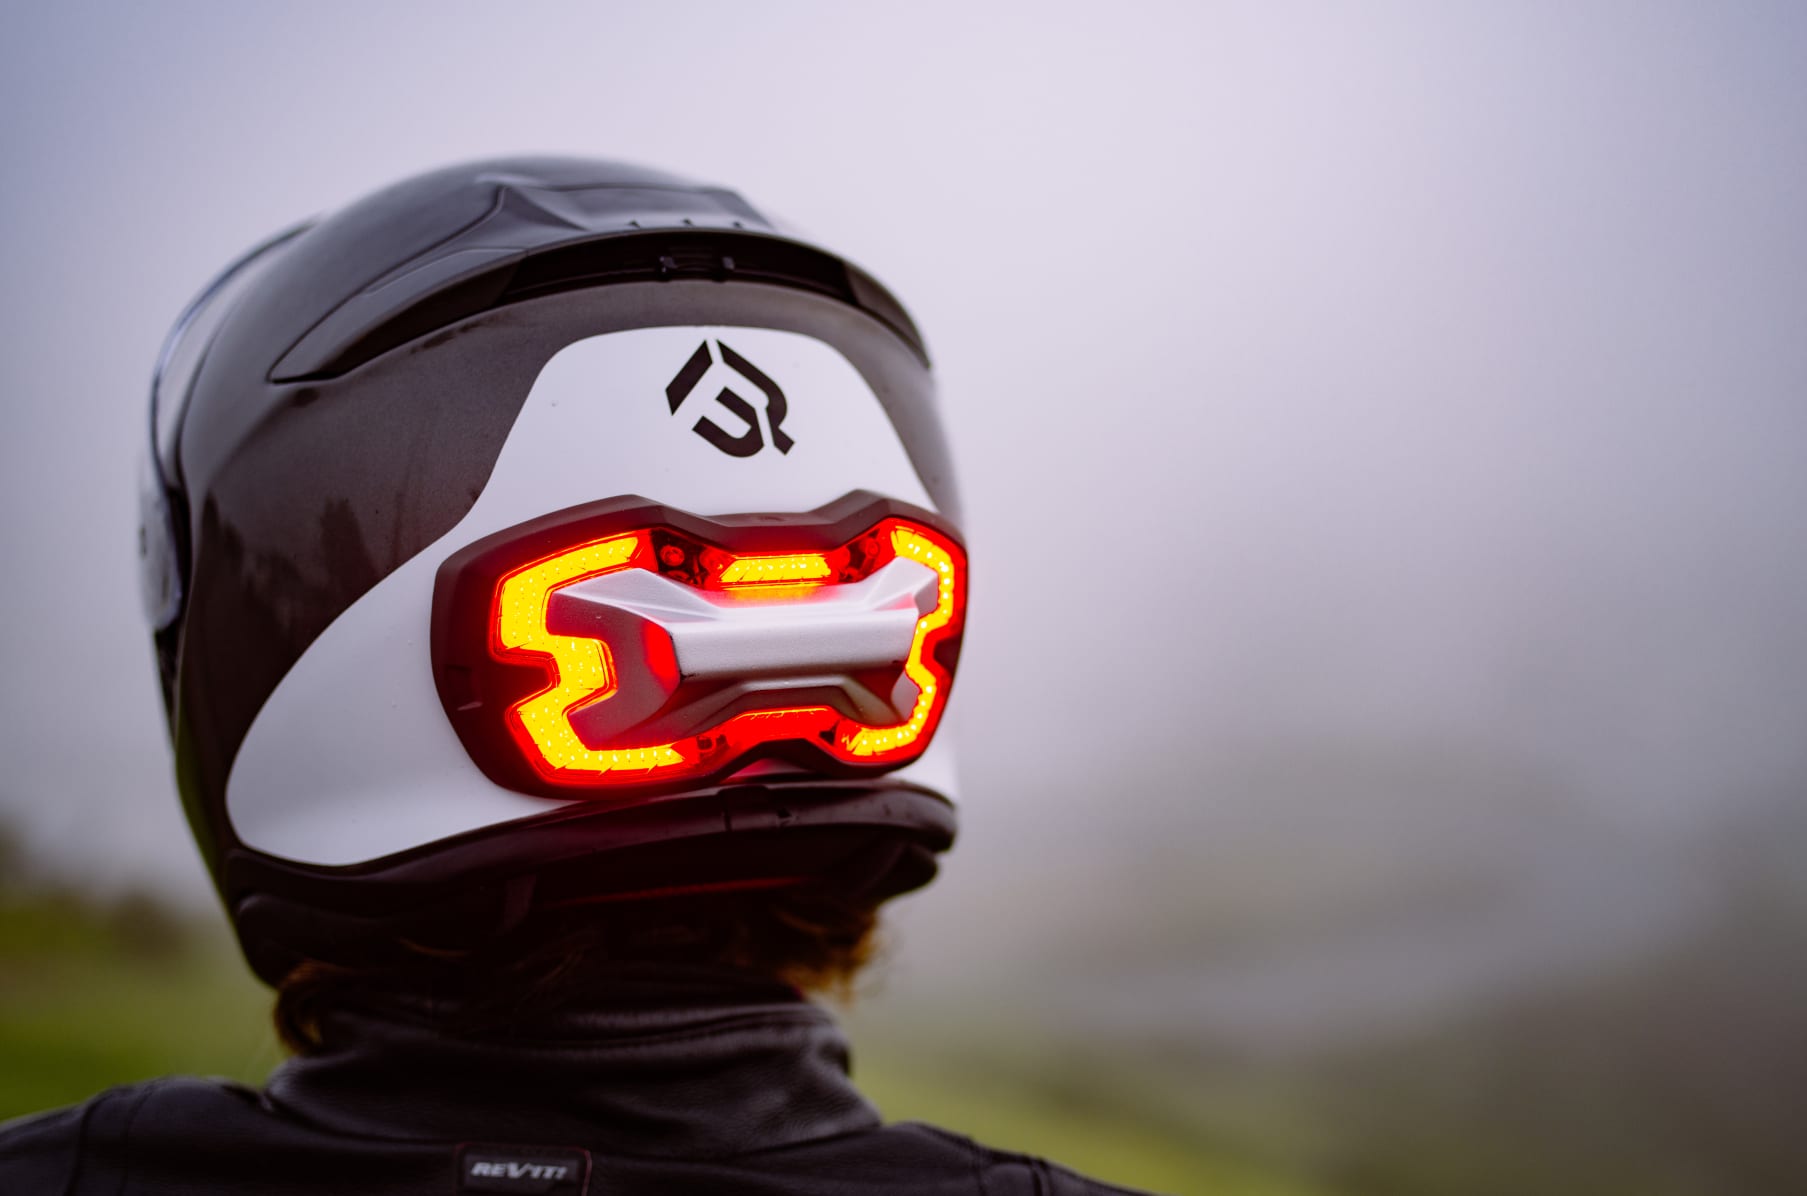 BrakeFree: The Smart for Motorcyclists | Indiegogo